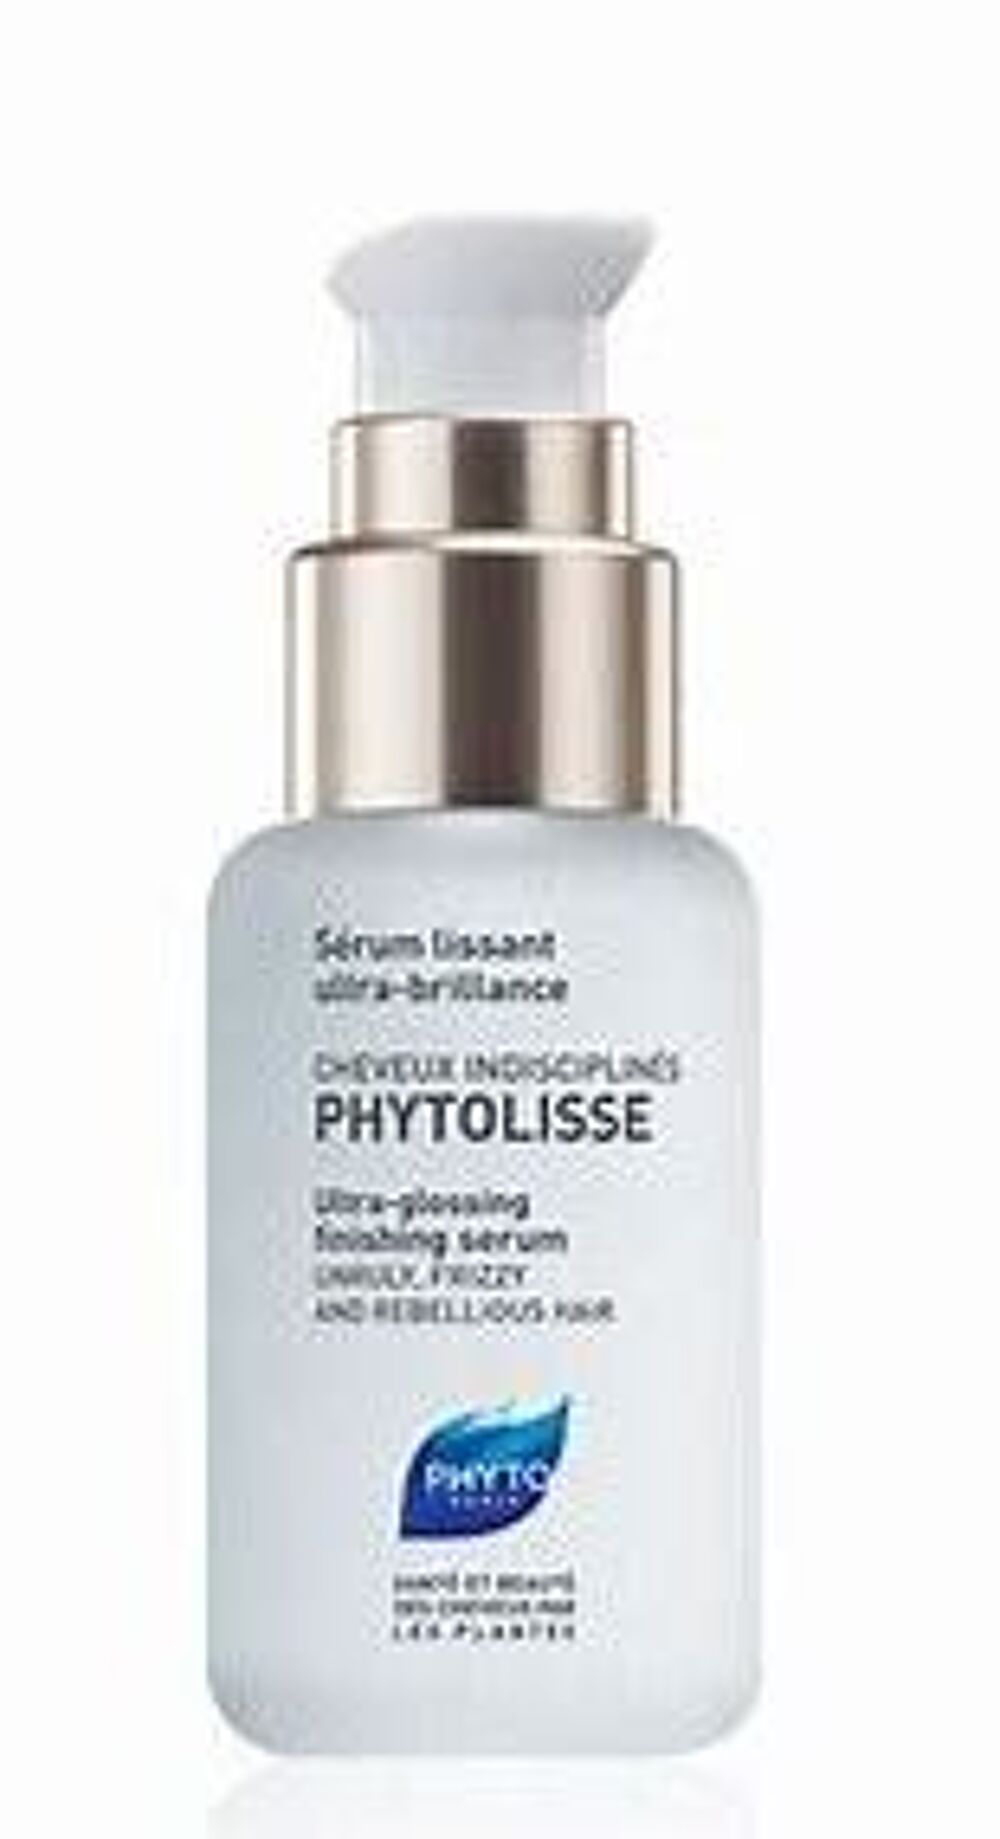 PHYTOLISSE LISSANT ULTRA BRILLANCE 50ML
Maroquinerie